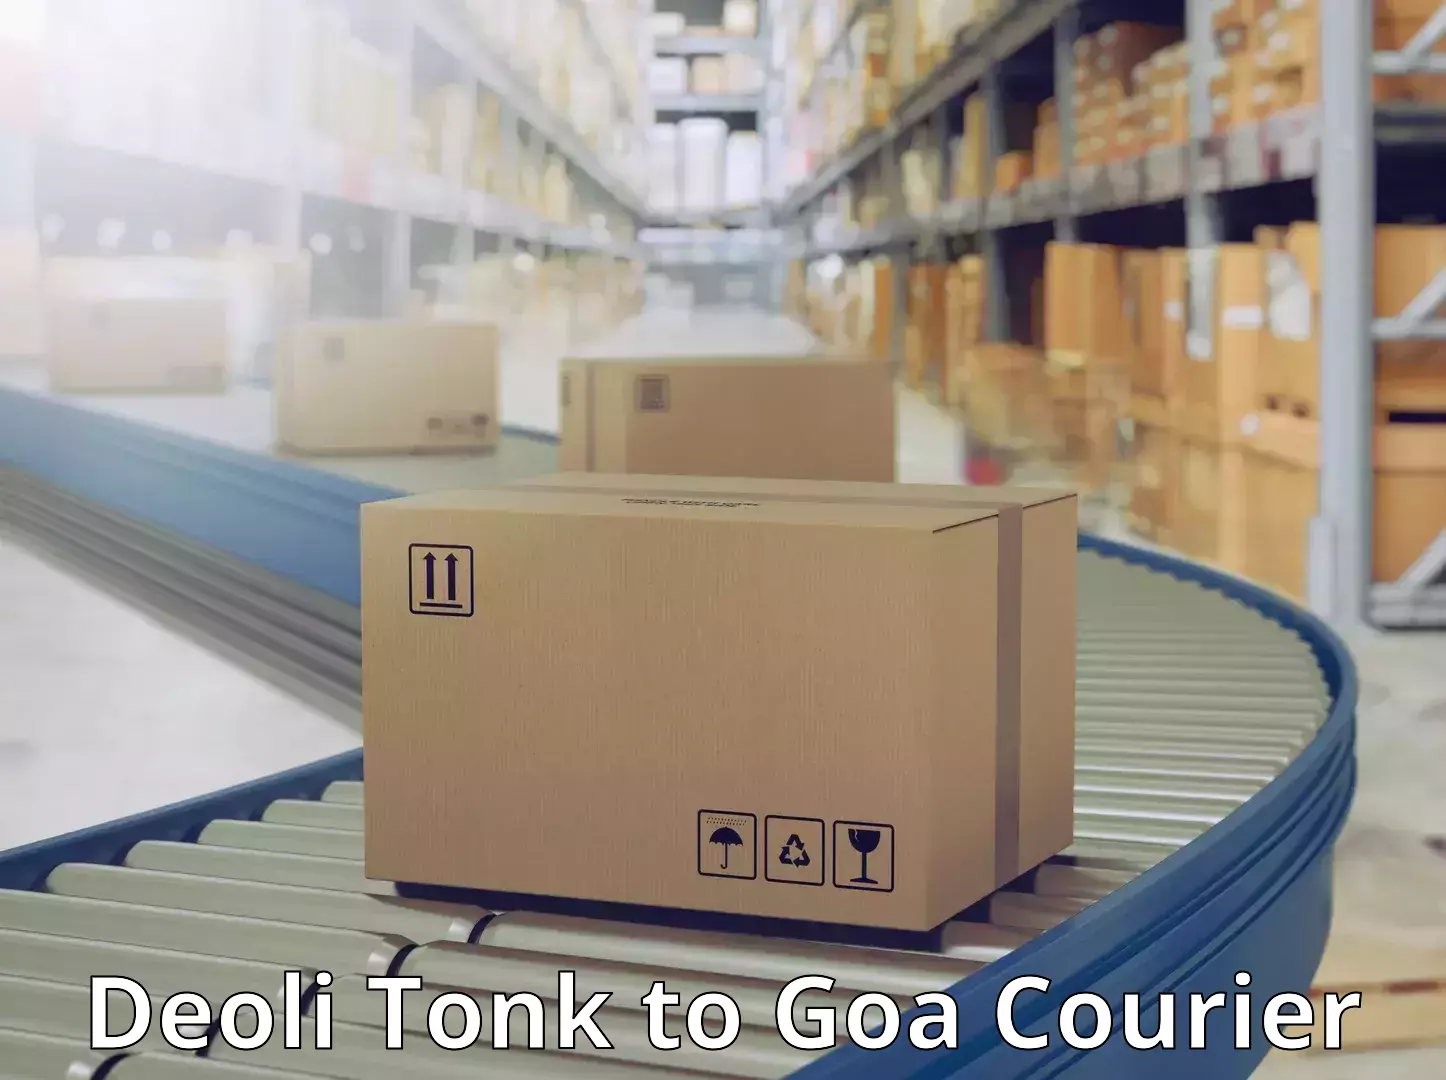 Business delivery service in Deoli Tonk to Goa